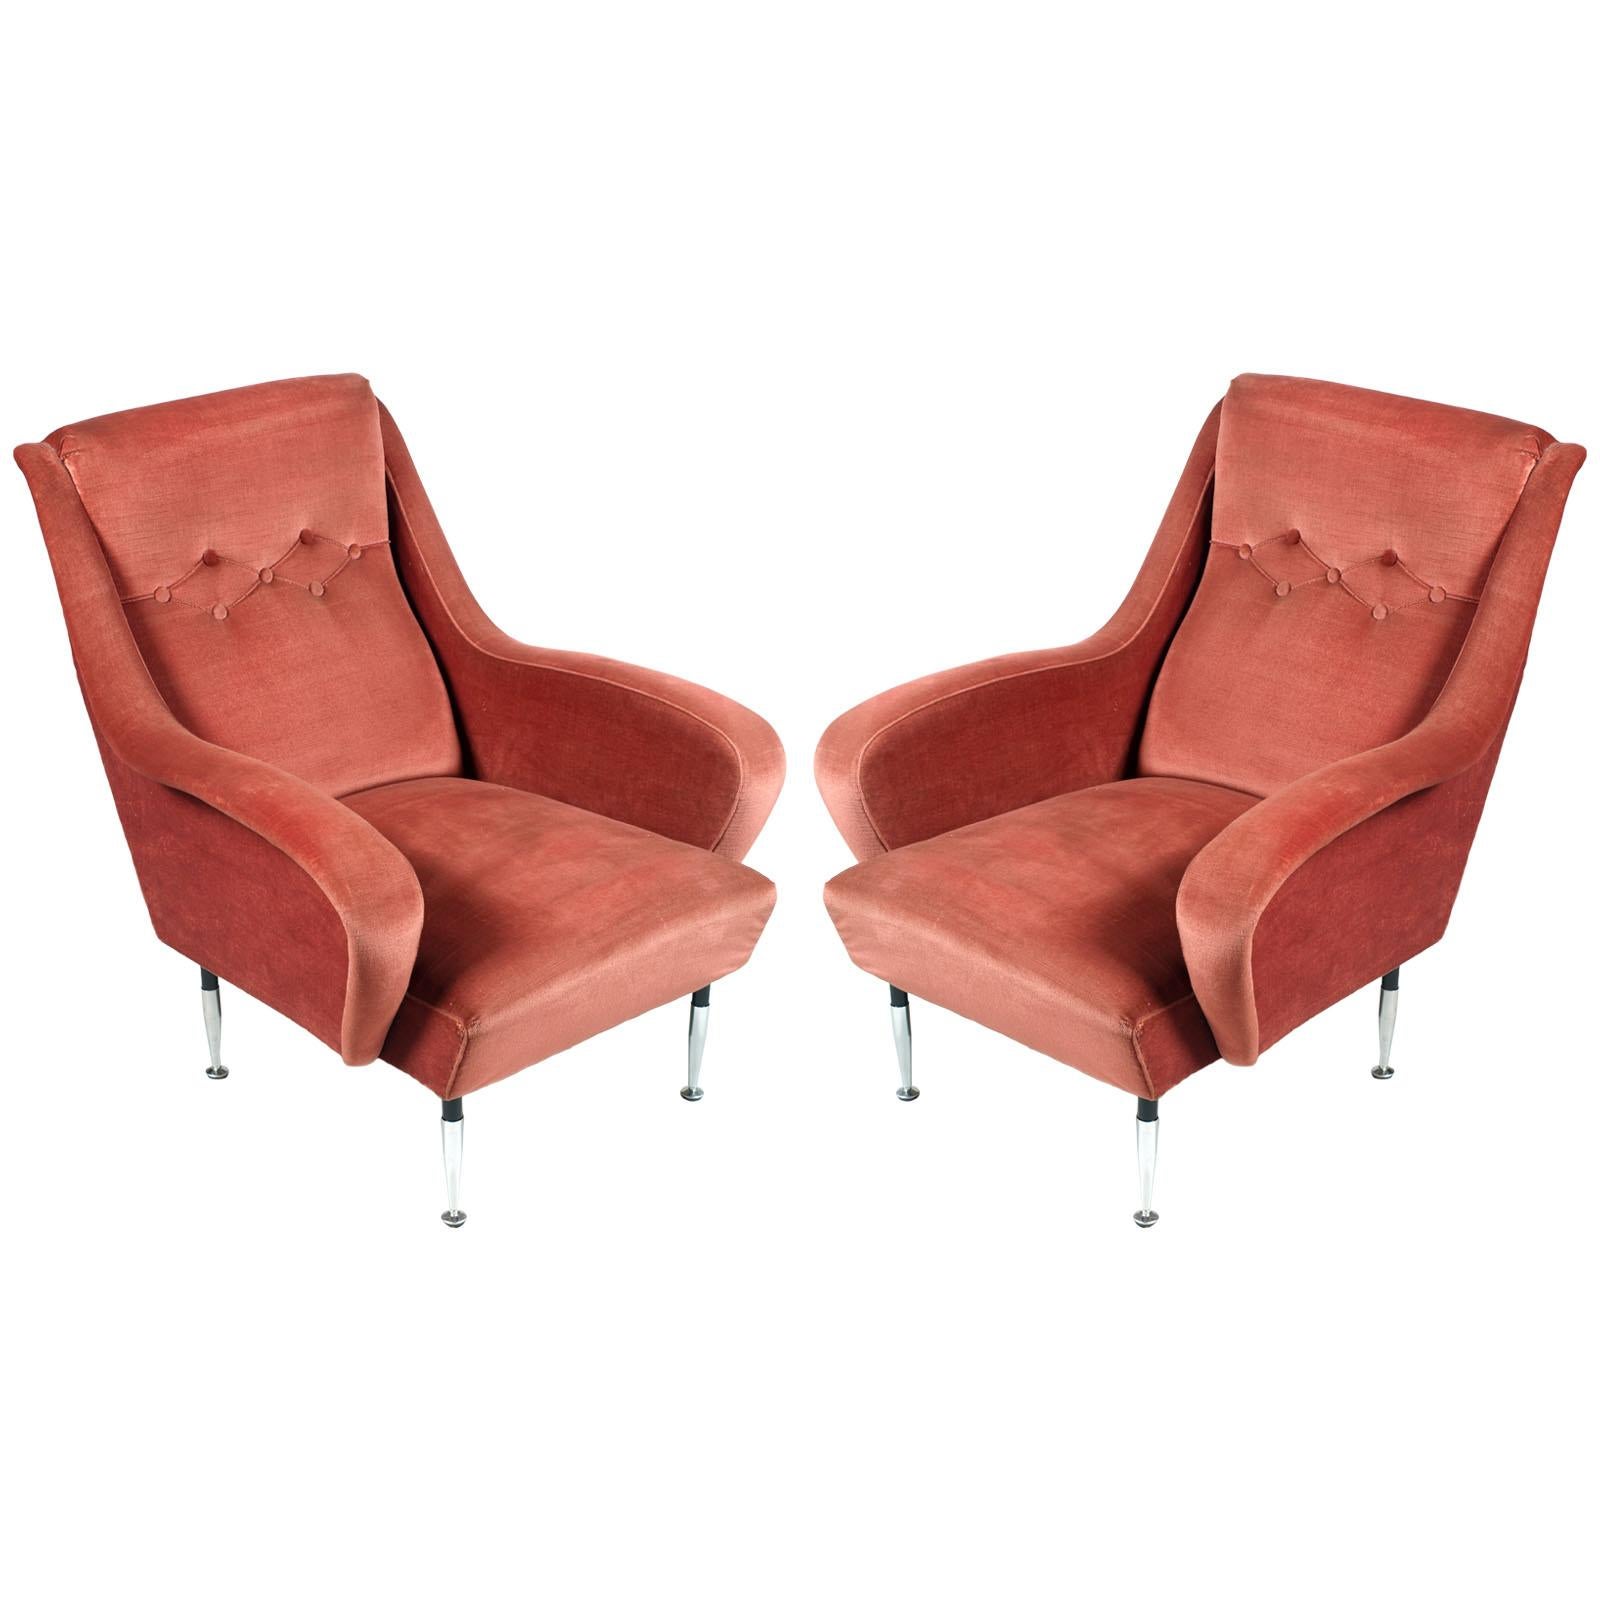 Italian Pair of Mid-Century Modern Lounge Chairs, Paolo Buffa Pink Coral Velvet